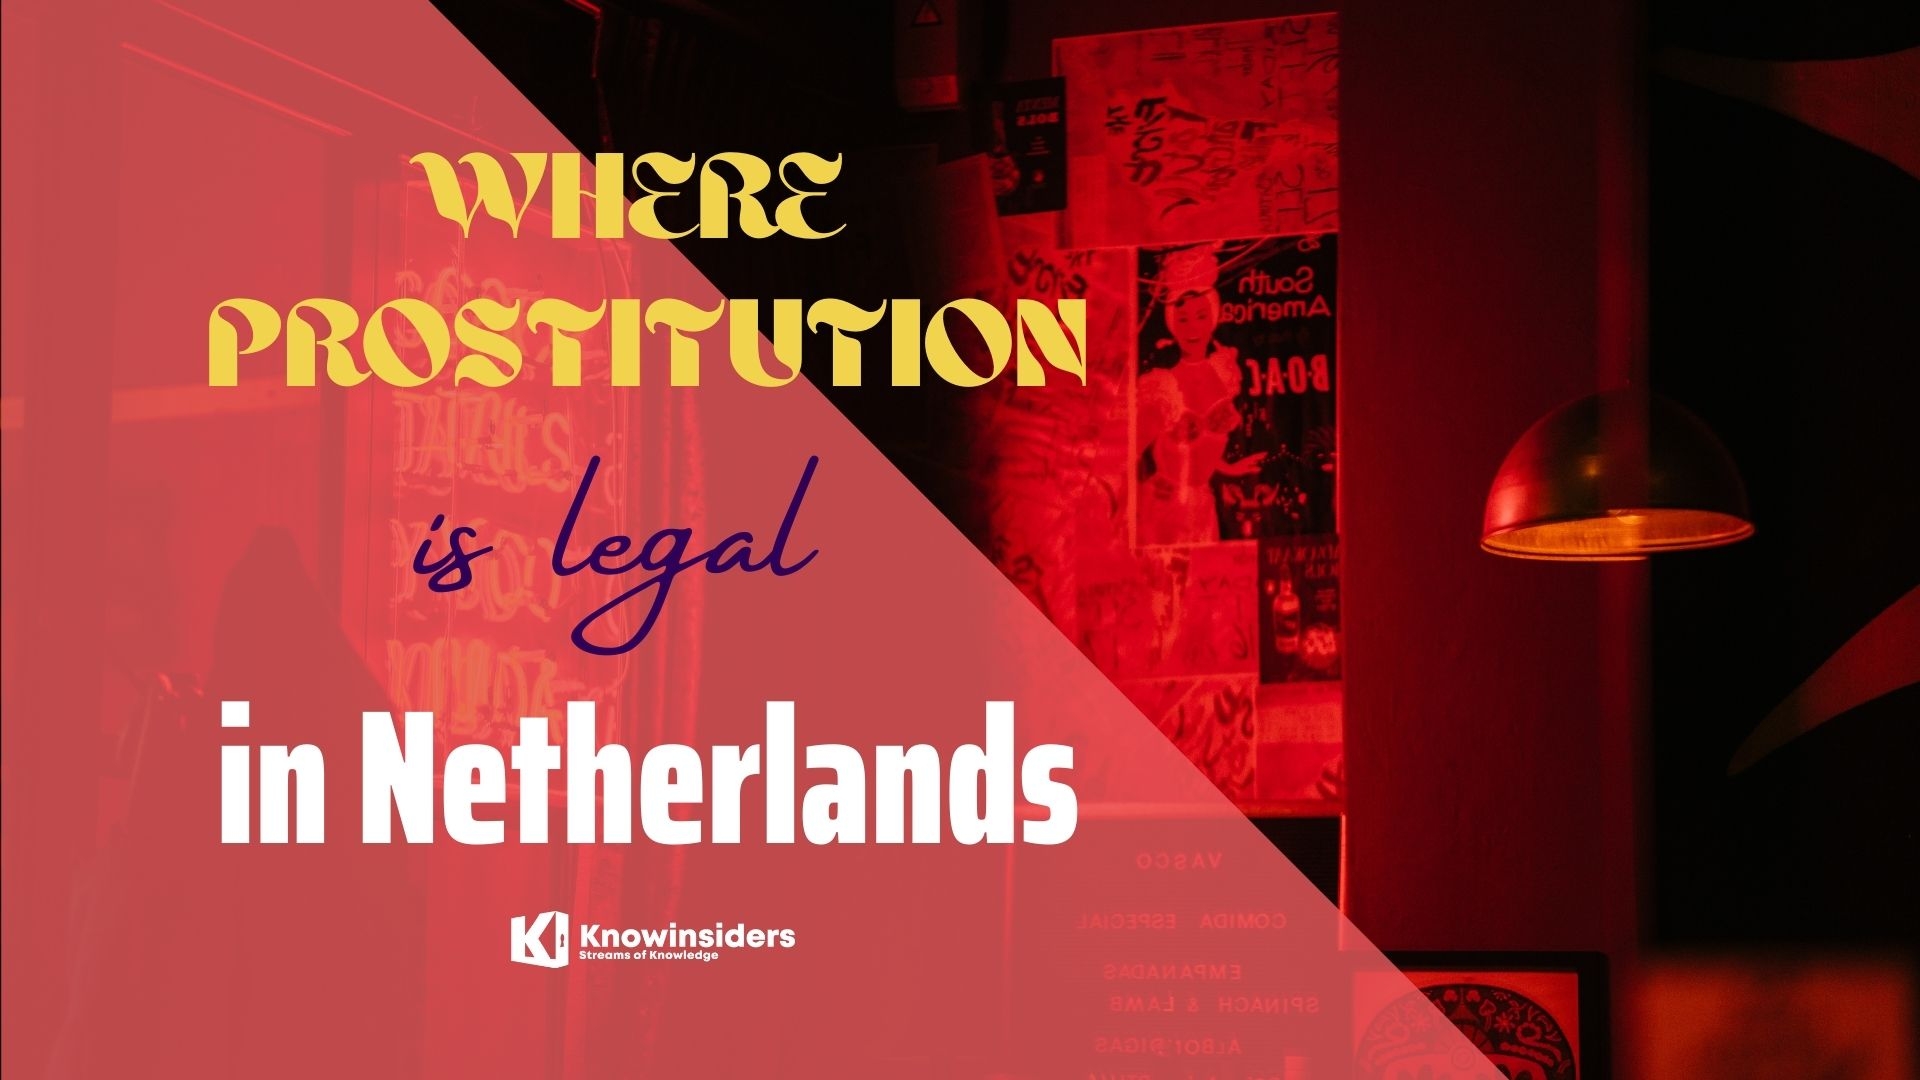 Where Prostitution Is Legal In Netherlands